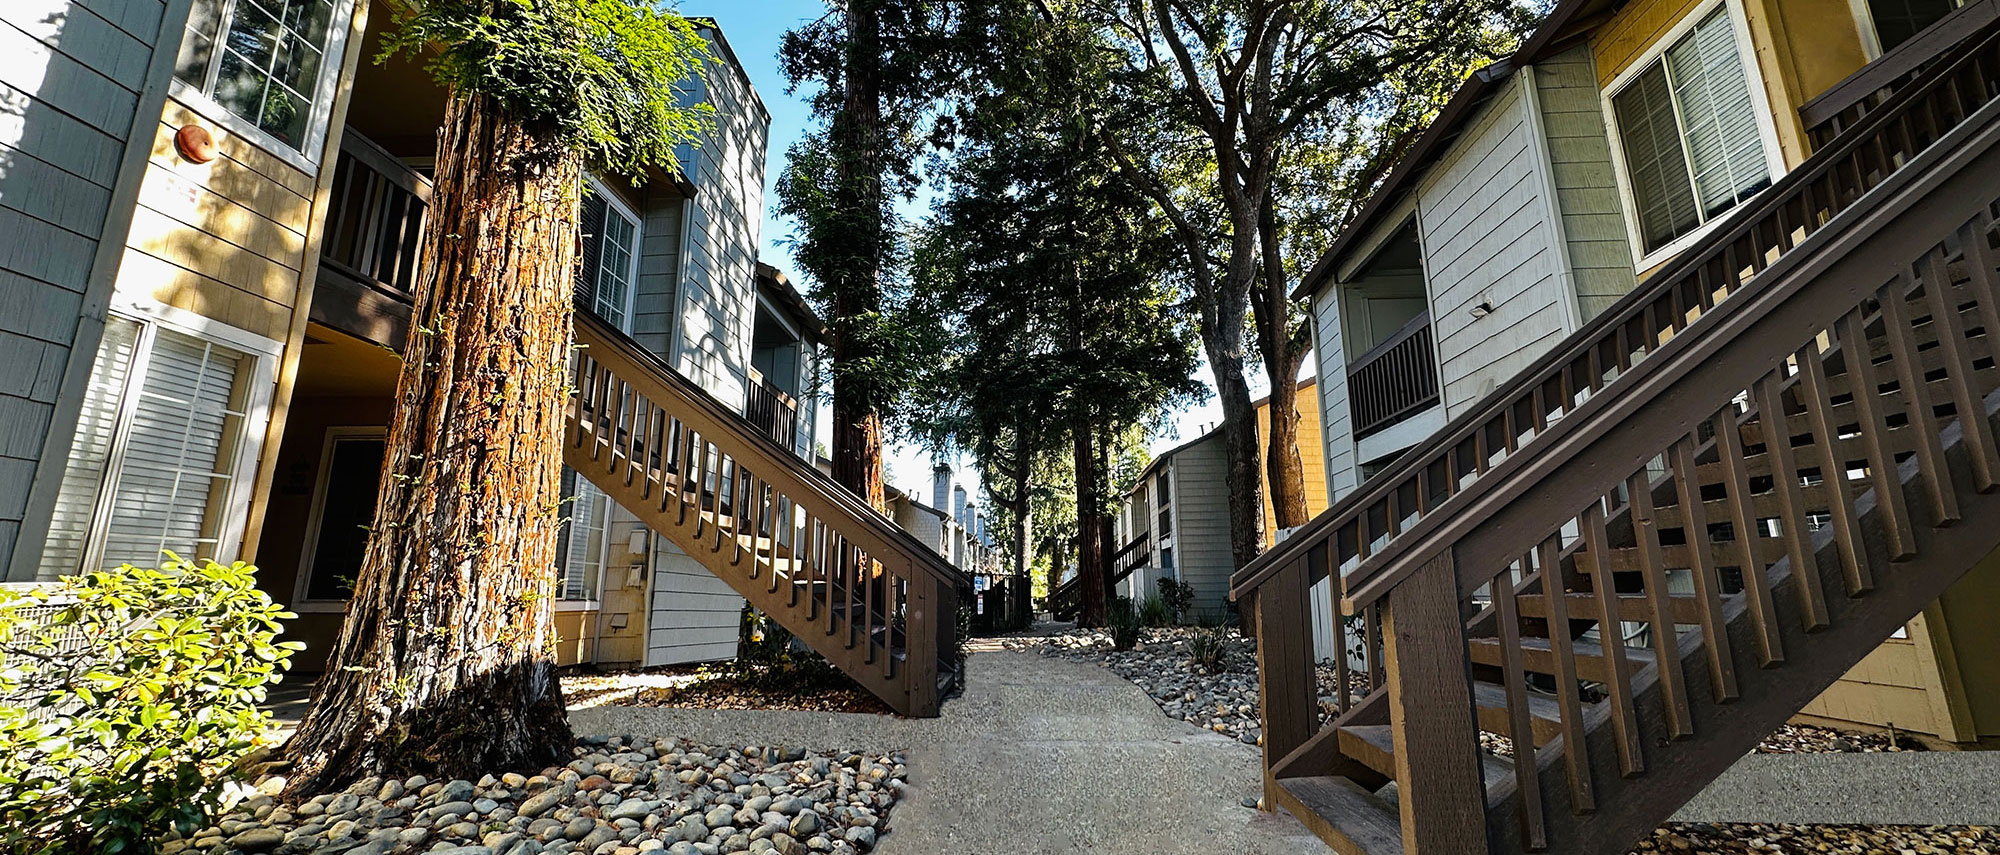 This image shows the entrance of some of the Walnut Village apartment units